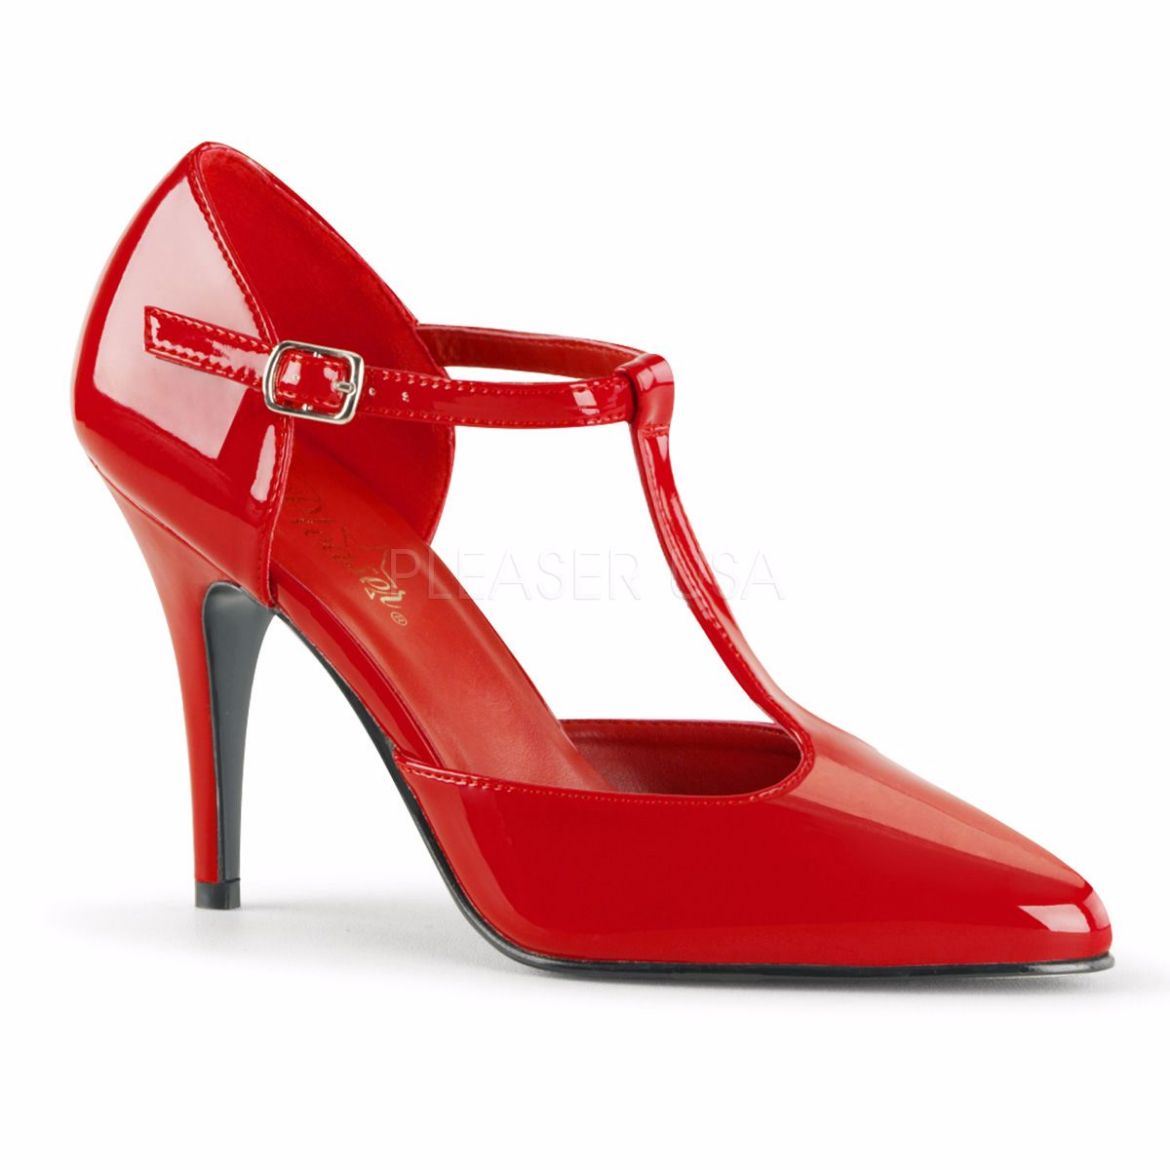 Product image of Pleaser Vanity-415 Red Patent, 4 inch (10.2 cm) Heel Court Pump Shoes